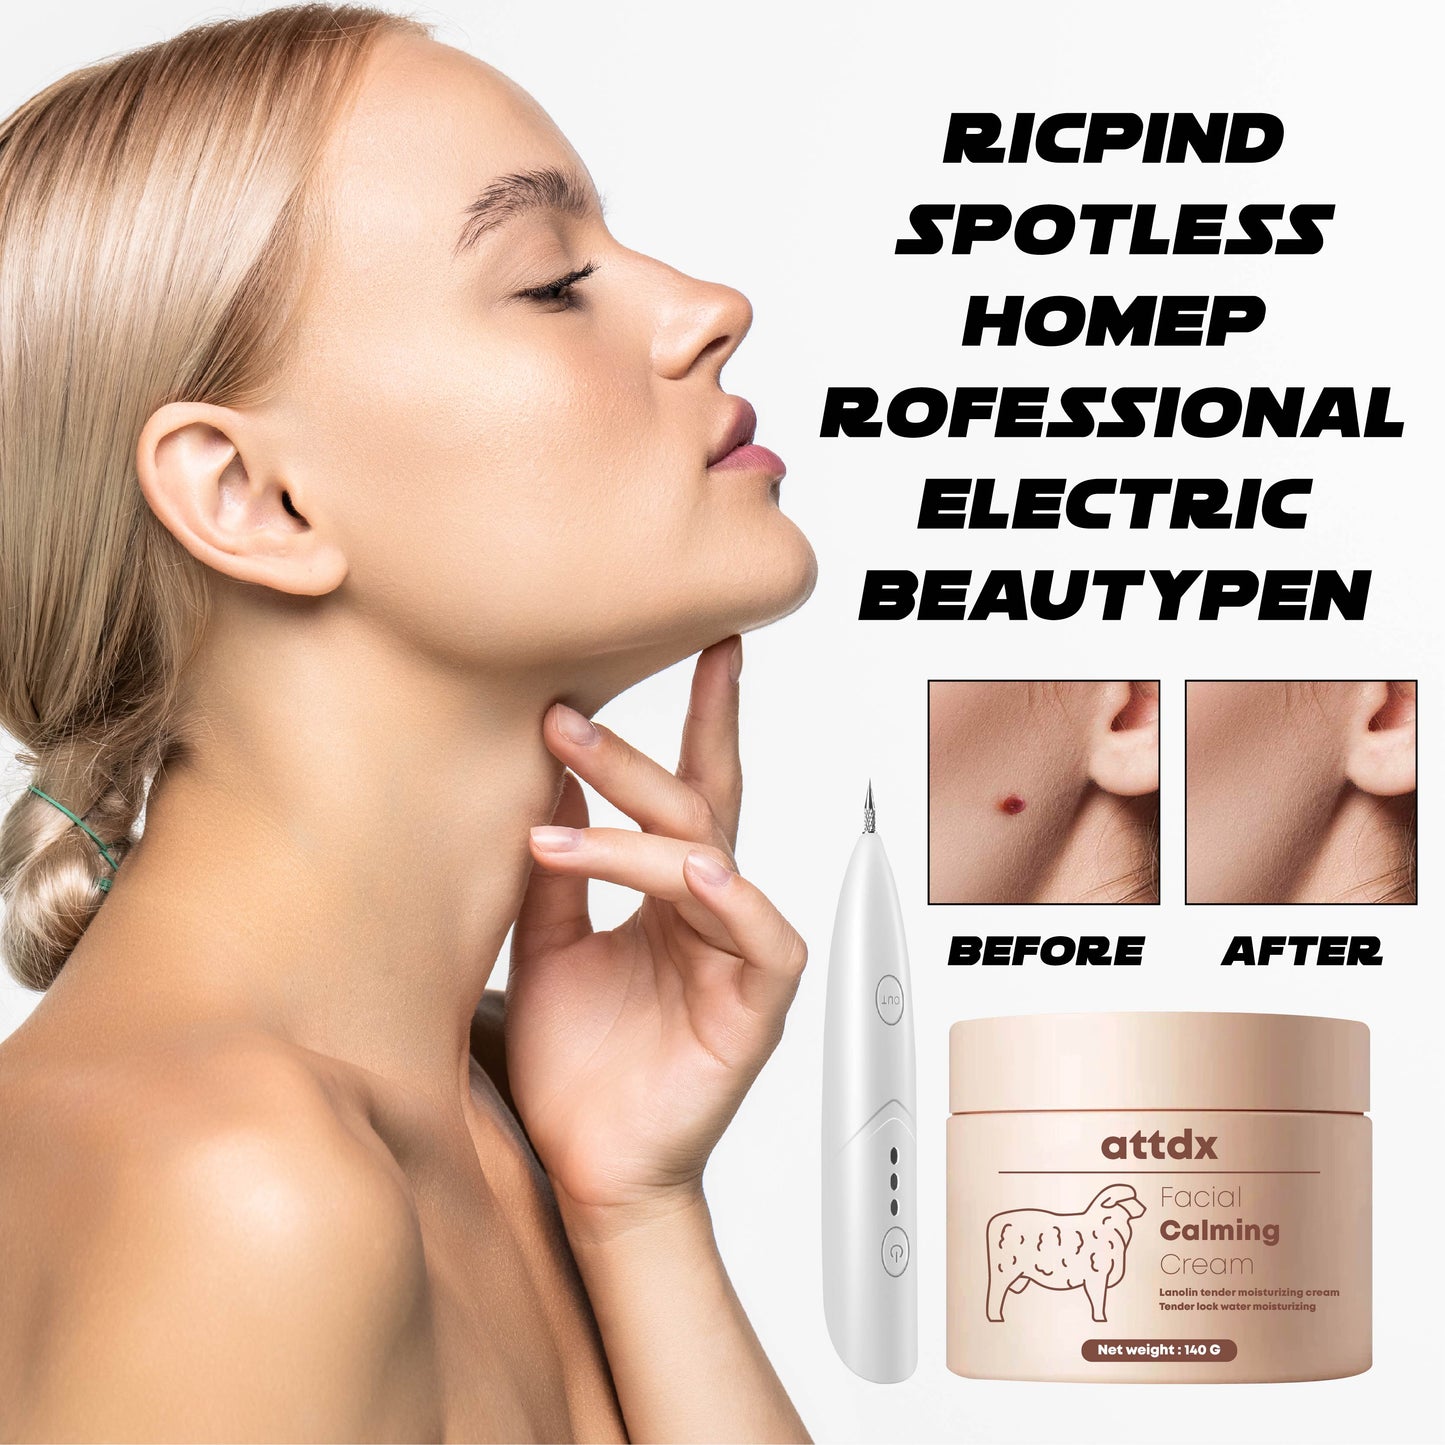 Ricpind Spotless HomeProfessional Electric BeautyPen